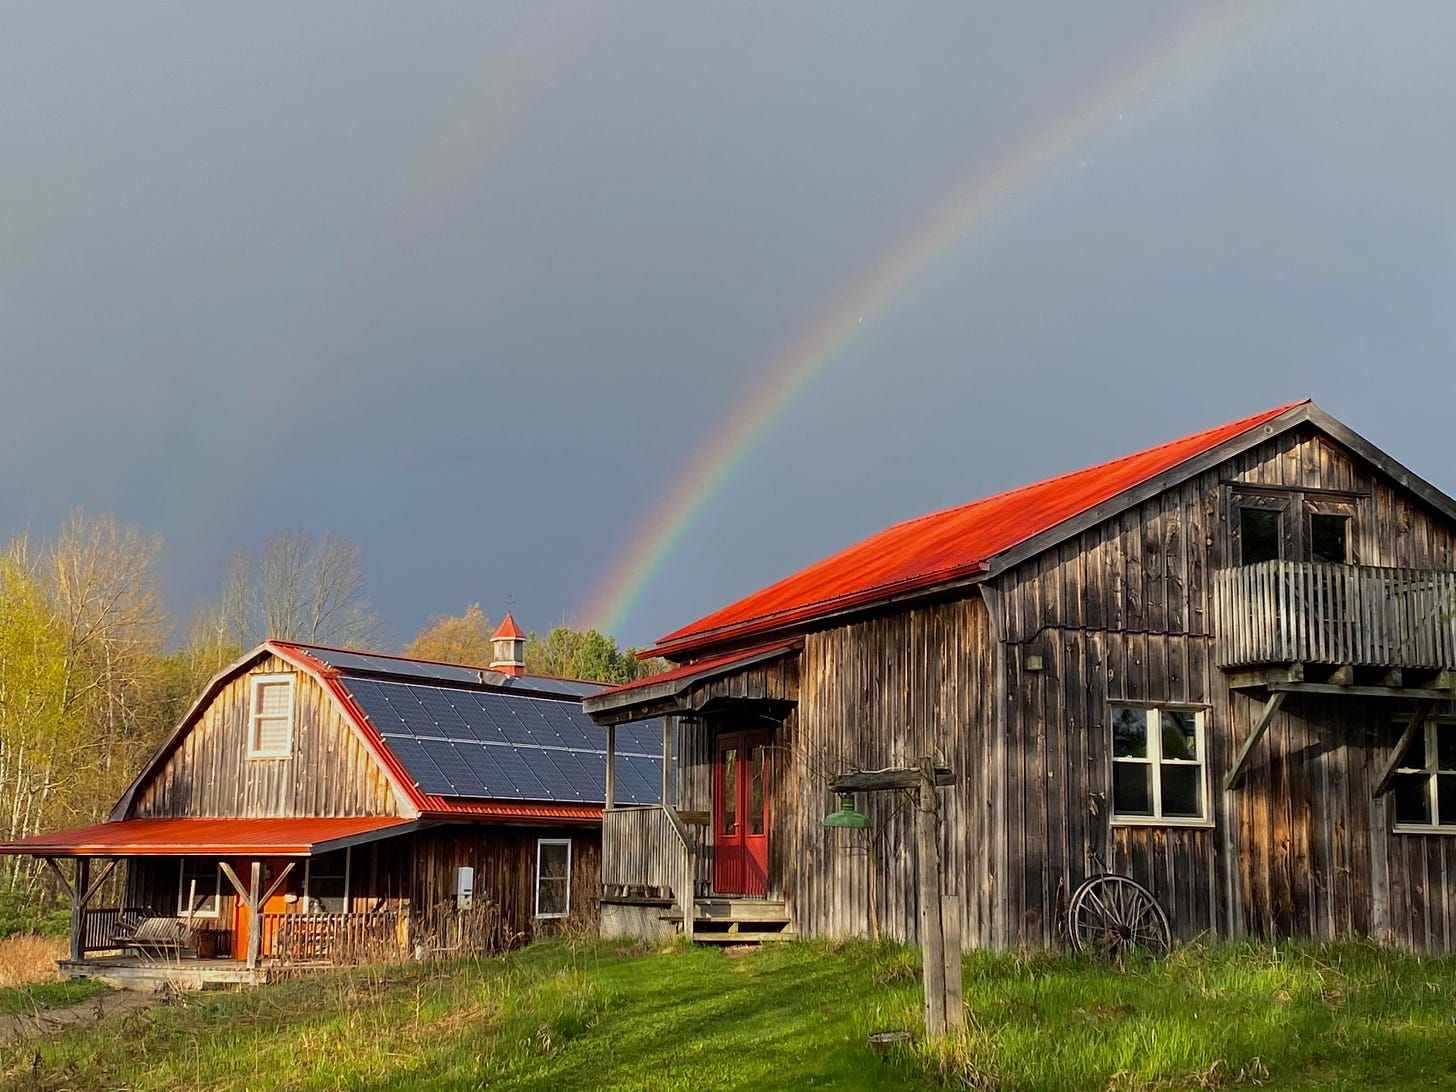 A double rainbow over two barn-like structuresr with red rooves. One roof has solar panels on it. 